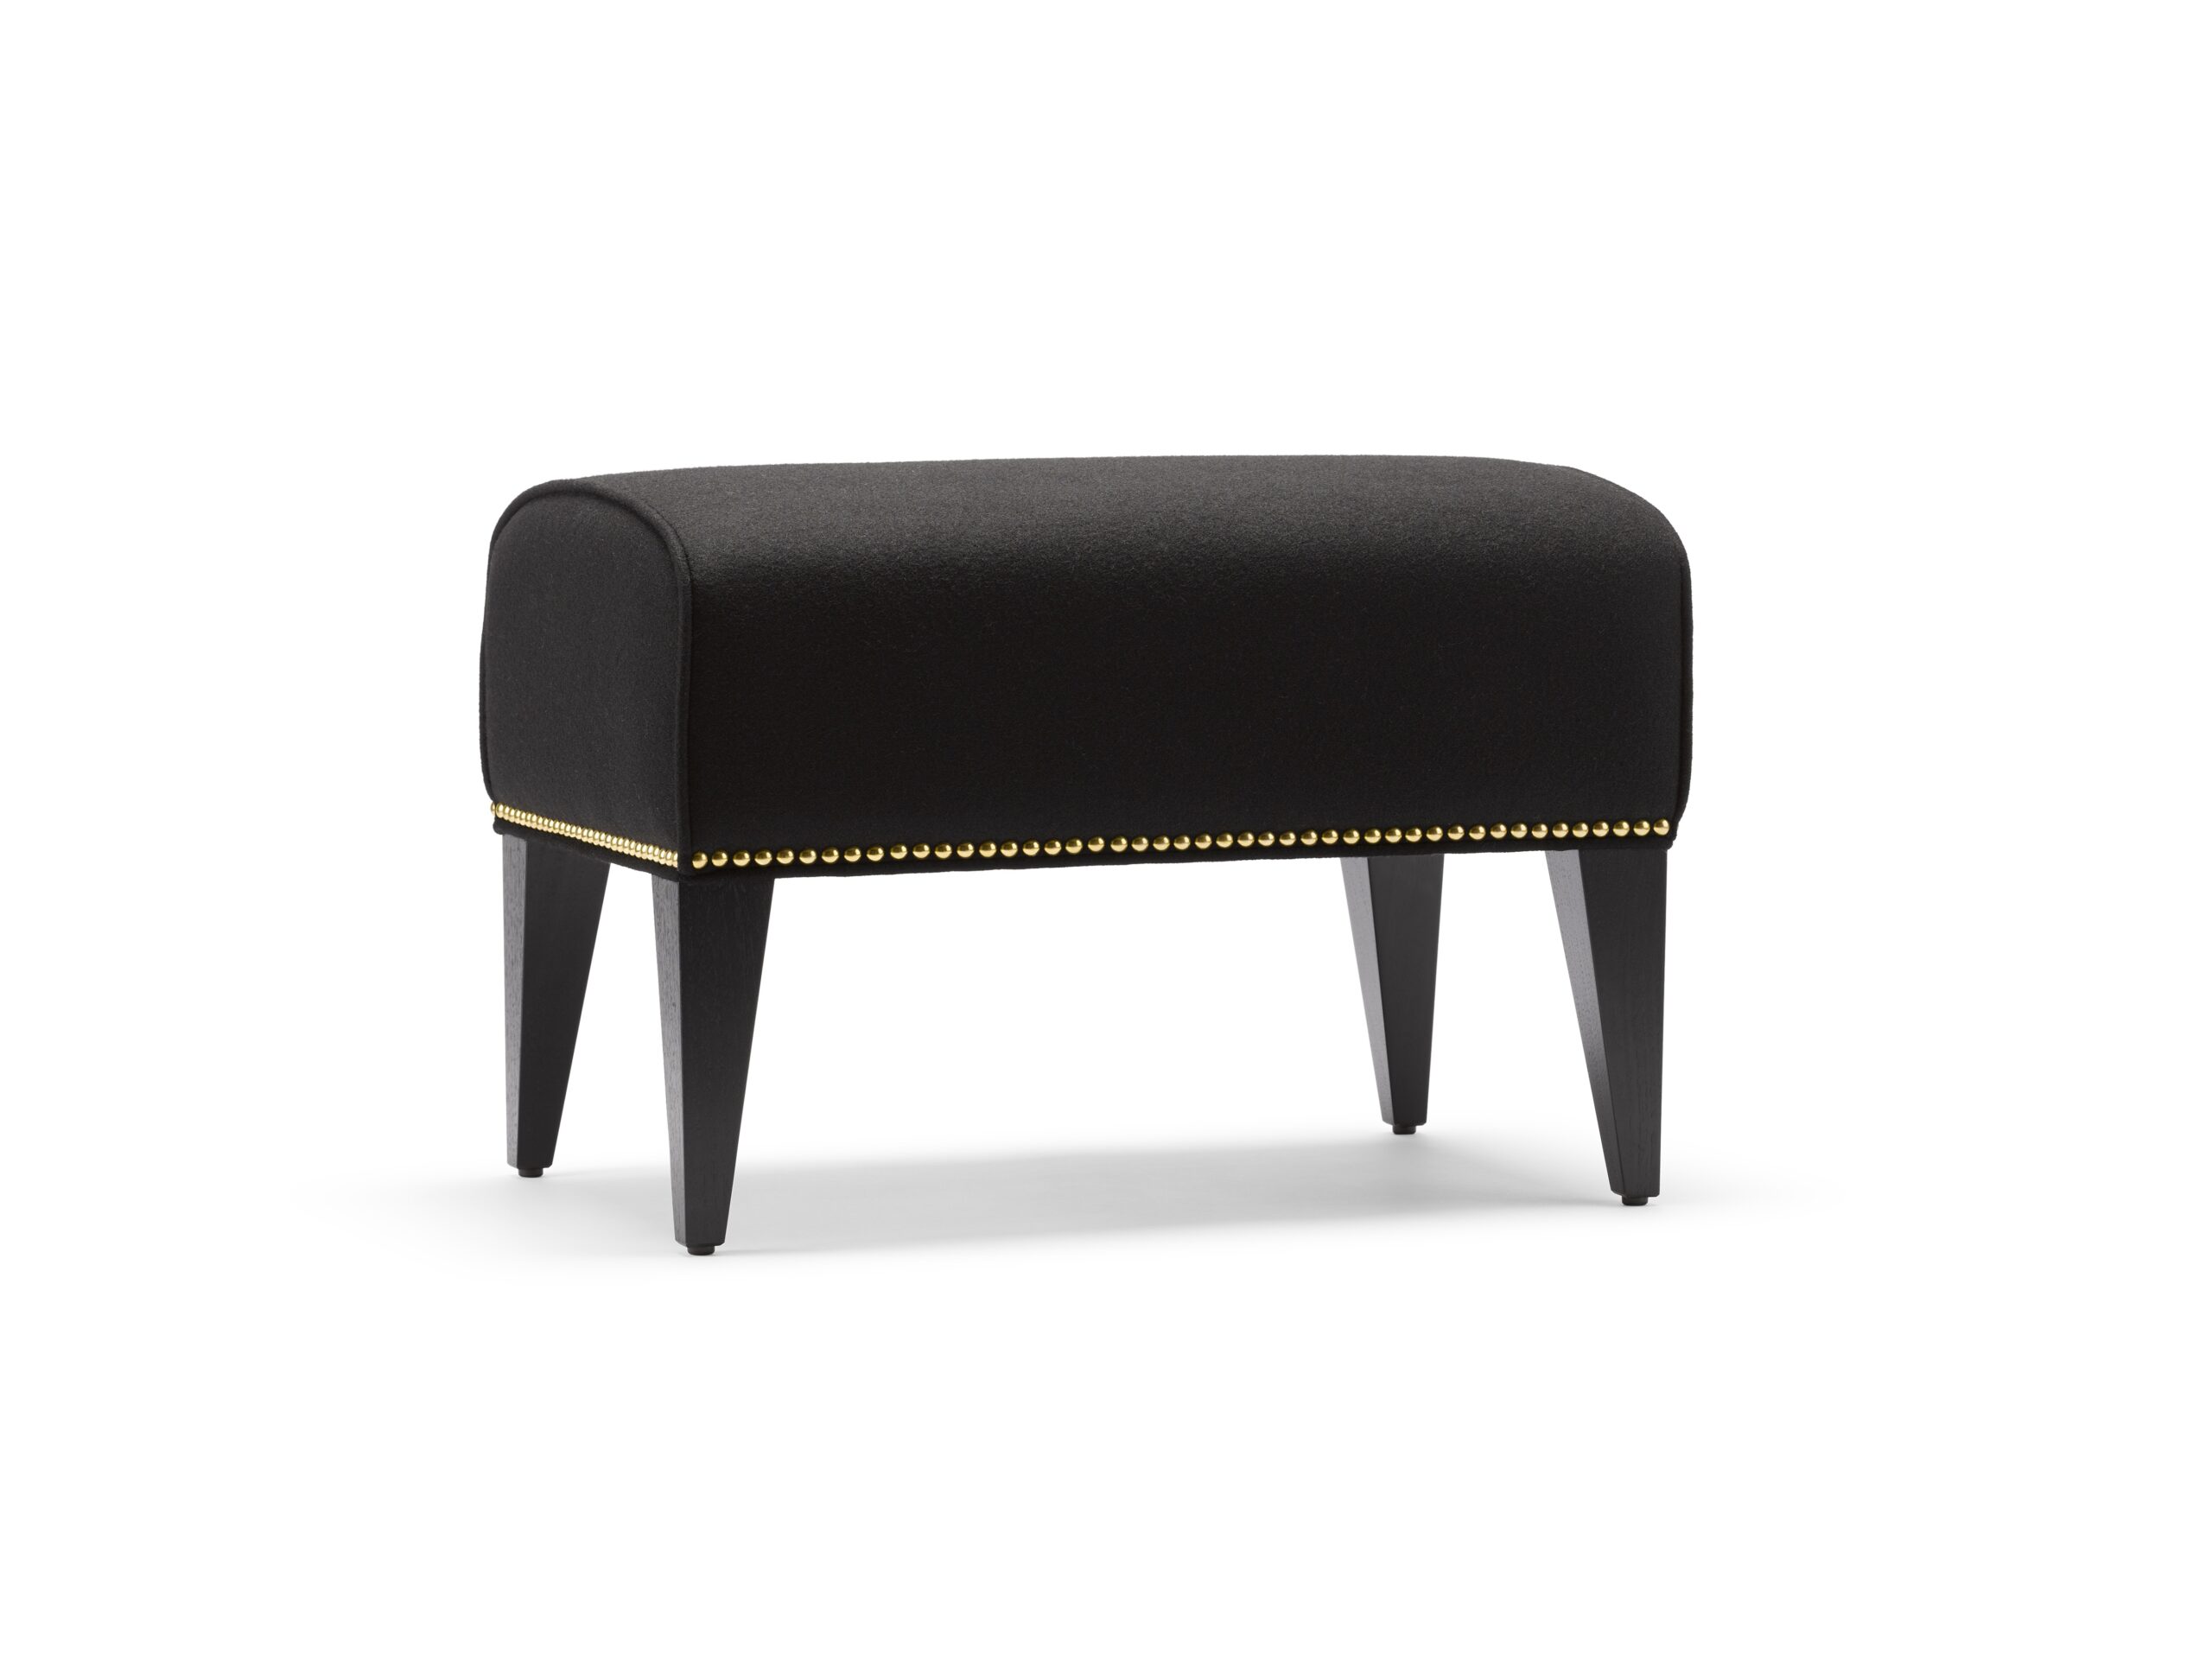 The Alae Footstool, shown with black velvet and decorative nailing.